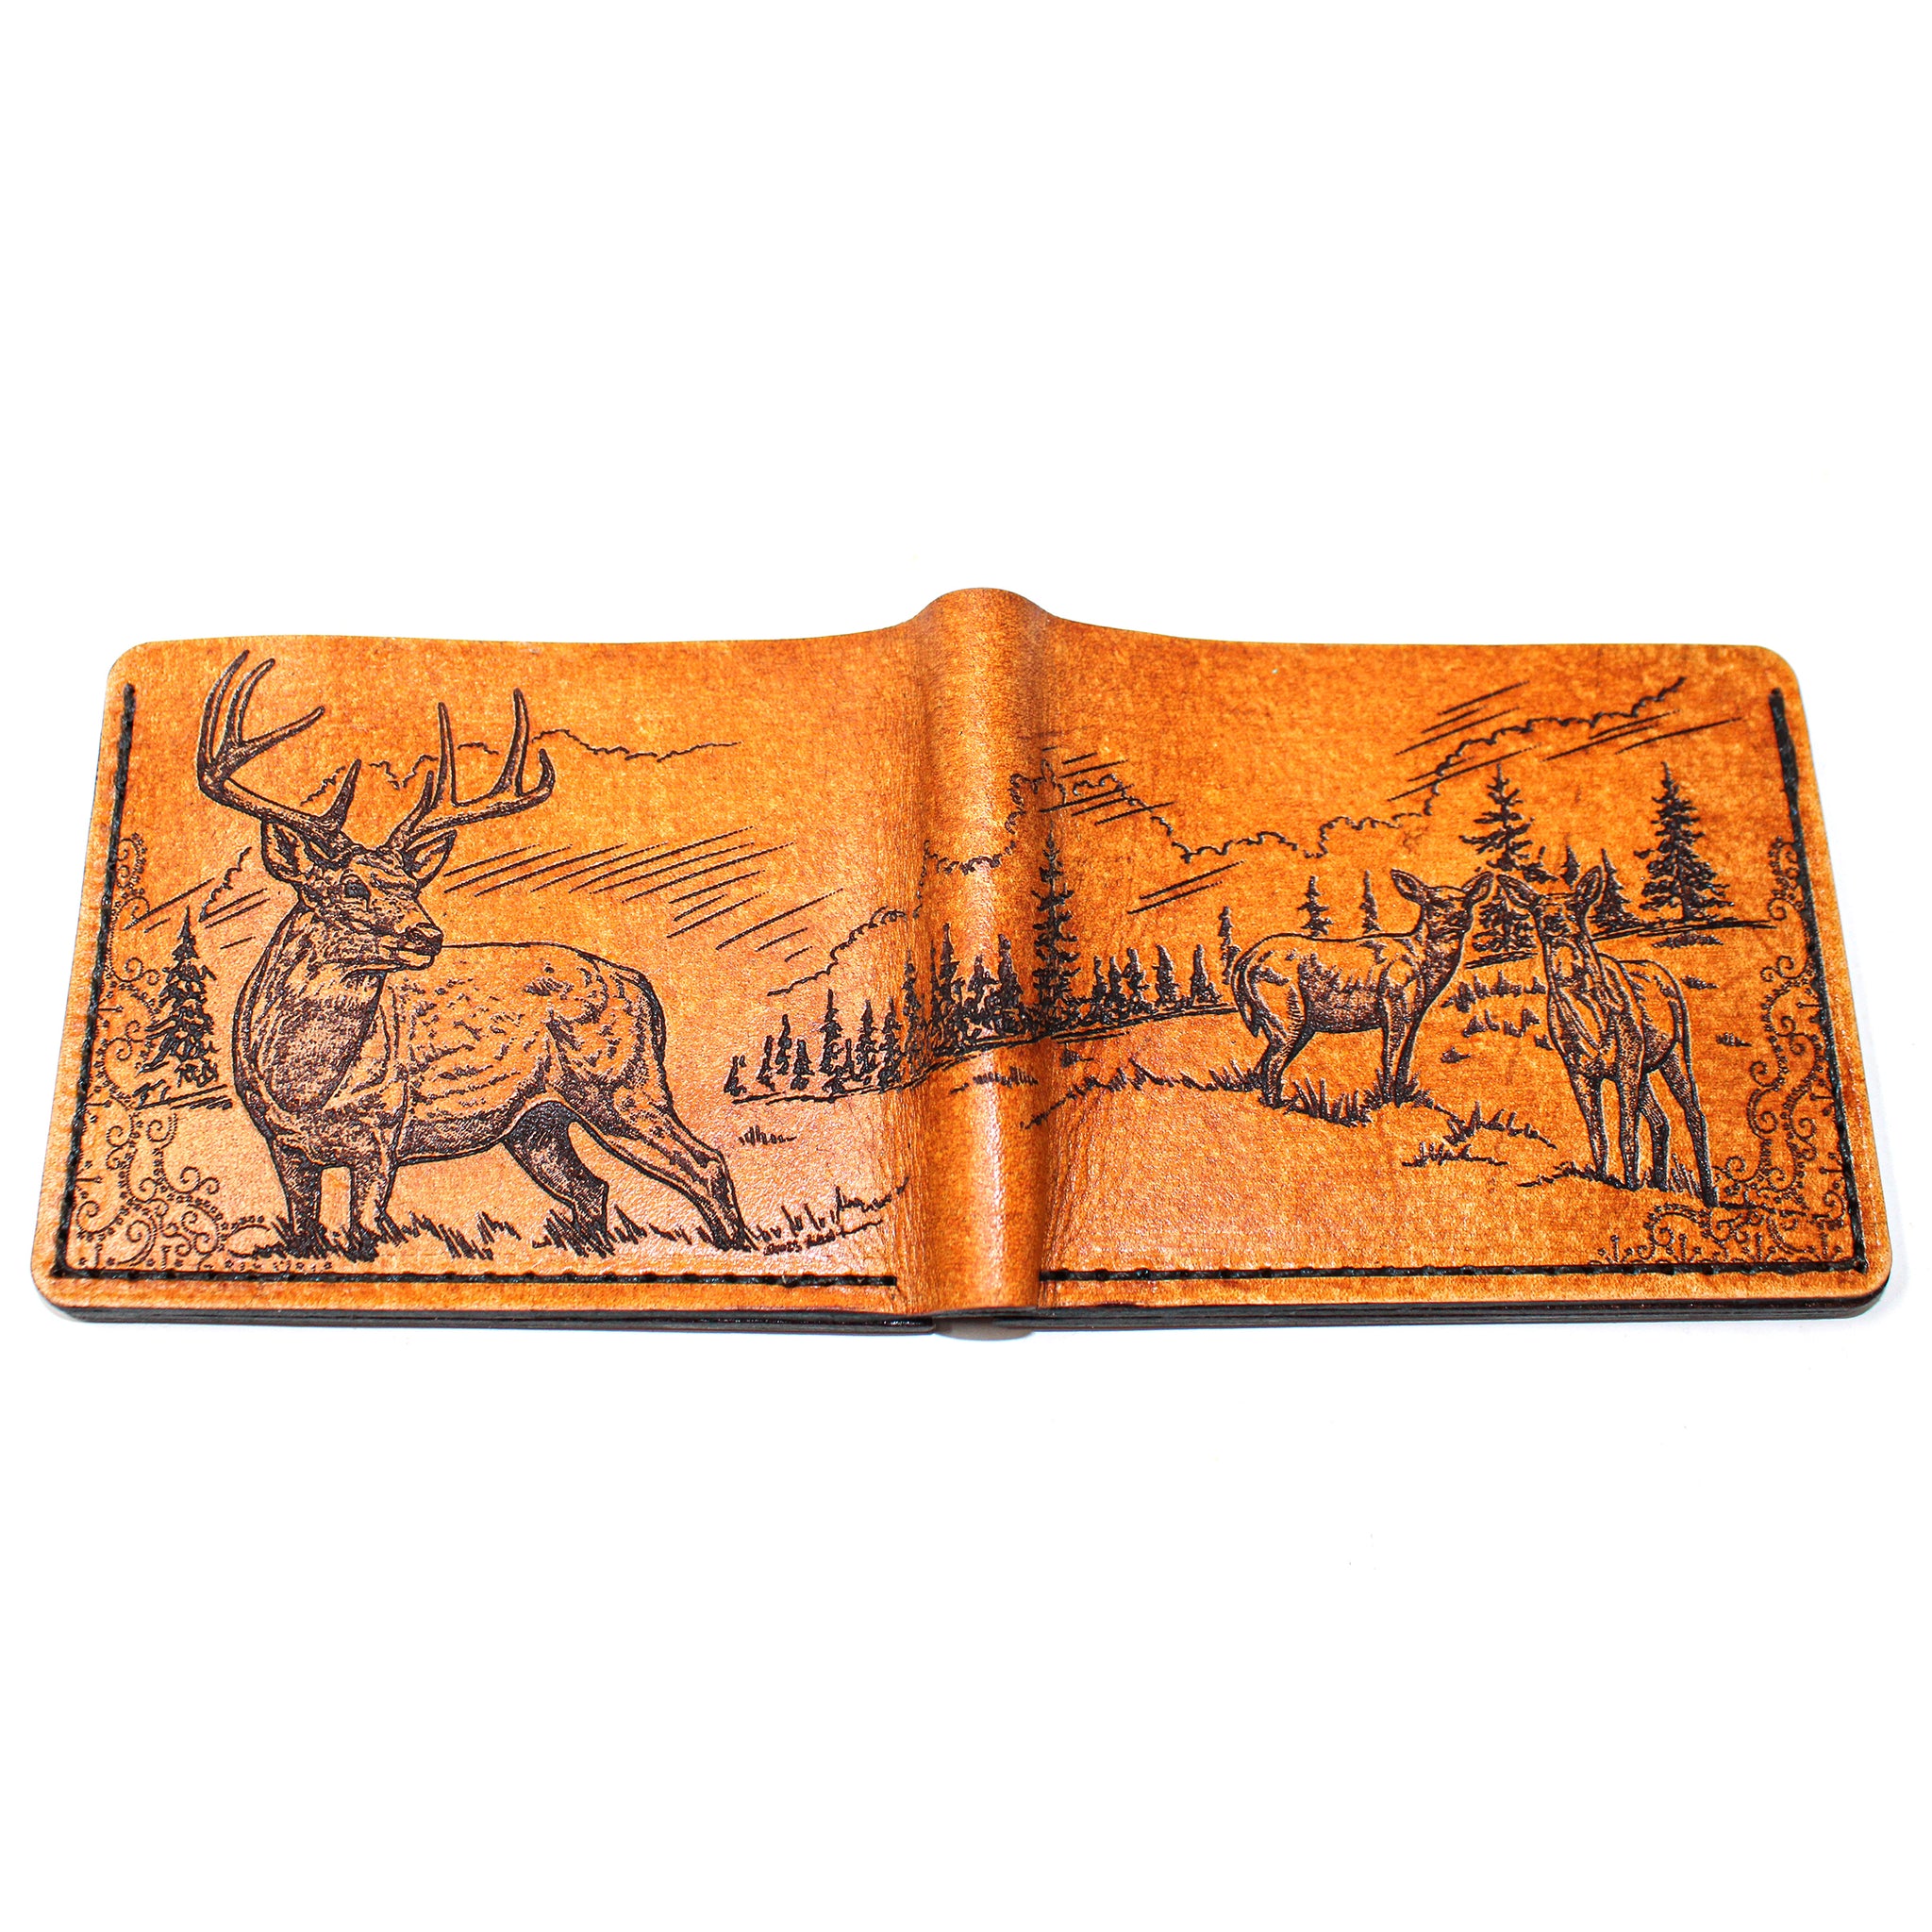 Leather Bill Fold Wallet -  Whitetail Glance